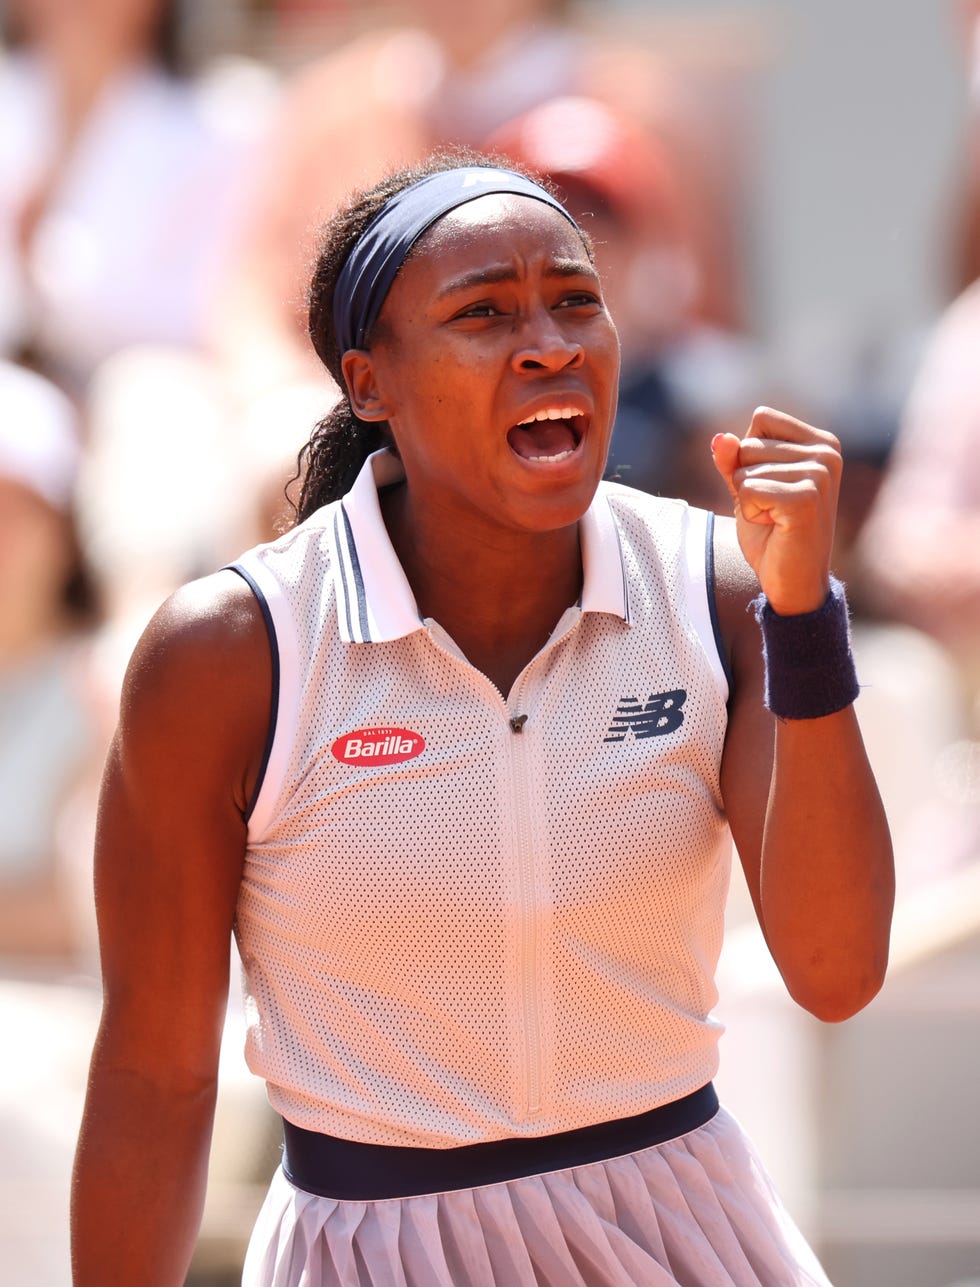 coco gauff making a celebratory gesture with her left arm and screaming during a tennis match